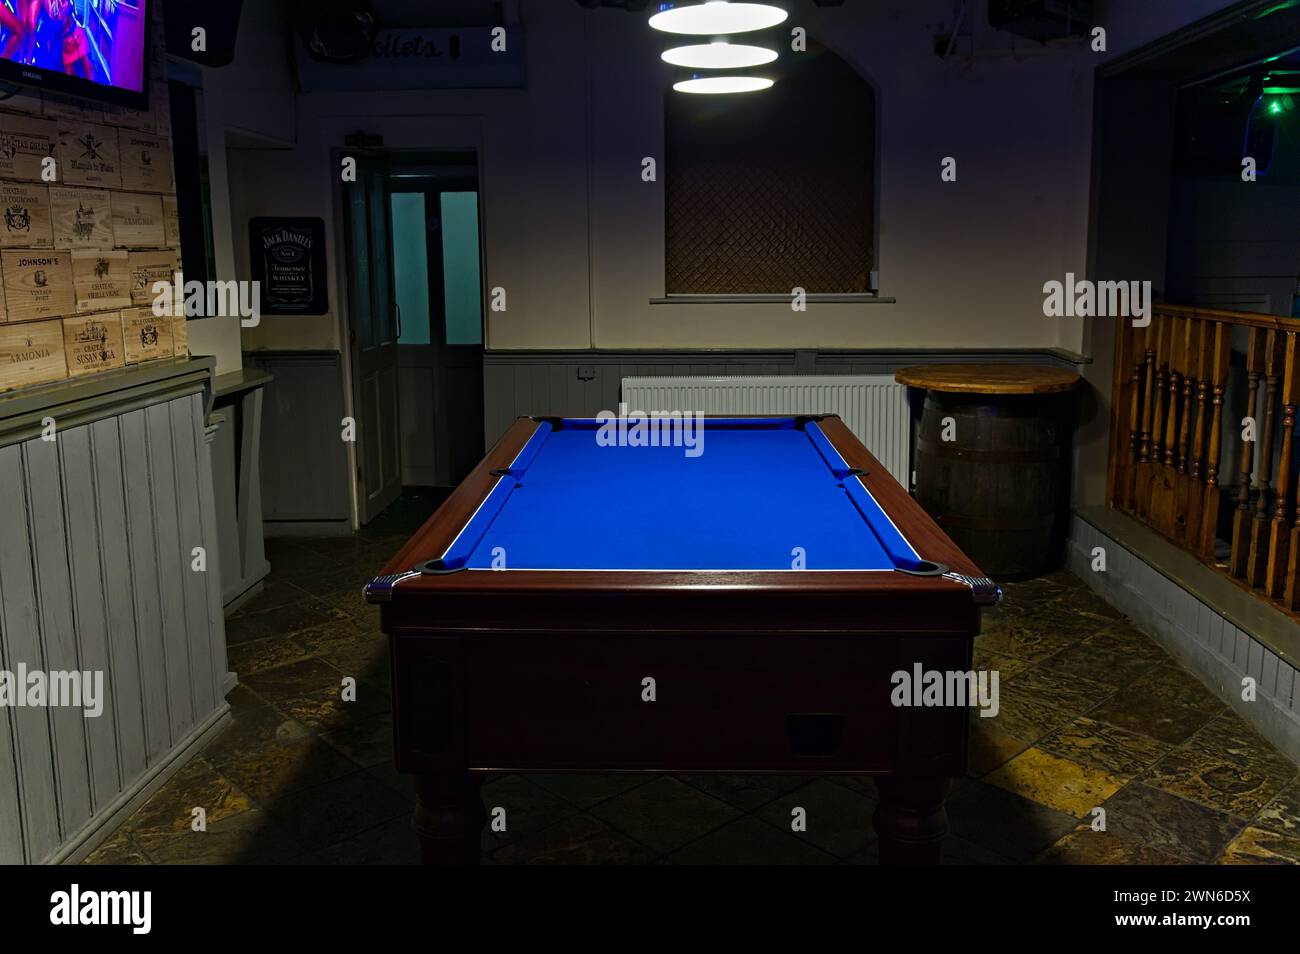 An empty pool table inside a pub Stock Photo